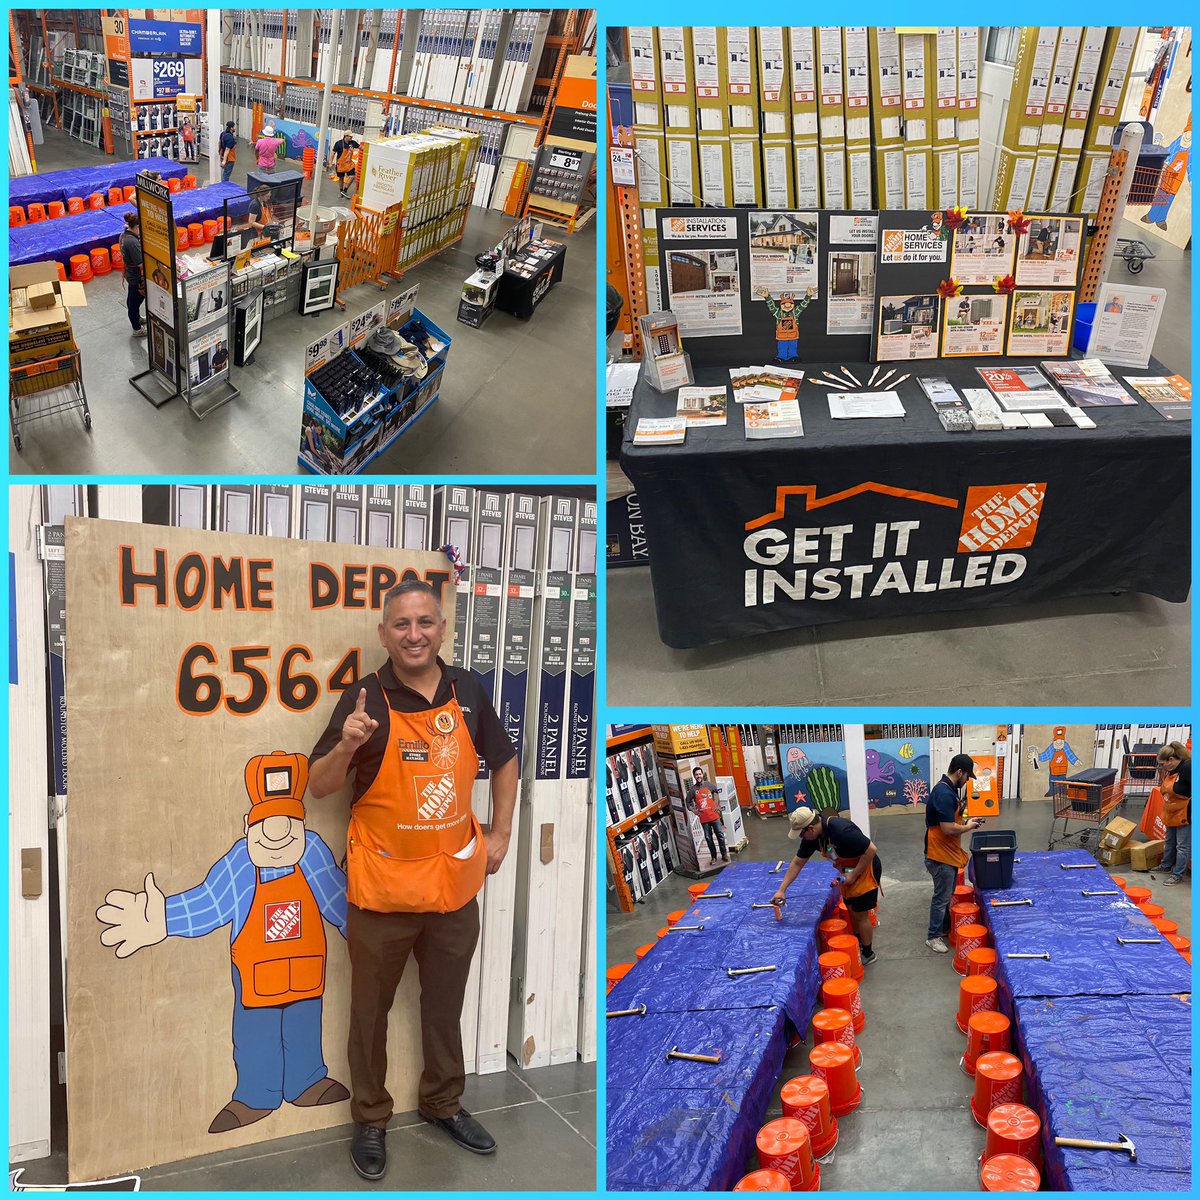 #thd6564 Teaming up Kids Workshop & Home Services today! 🔊🔊 shout out to our awesome SM @elizondo_iii for letting us put on this event! @JeffSmi82868051 @CorpusAmy @lisa_garcia6564 @smitty04 @angelso67742352